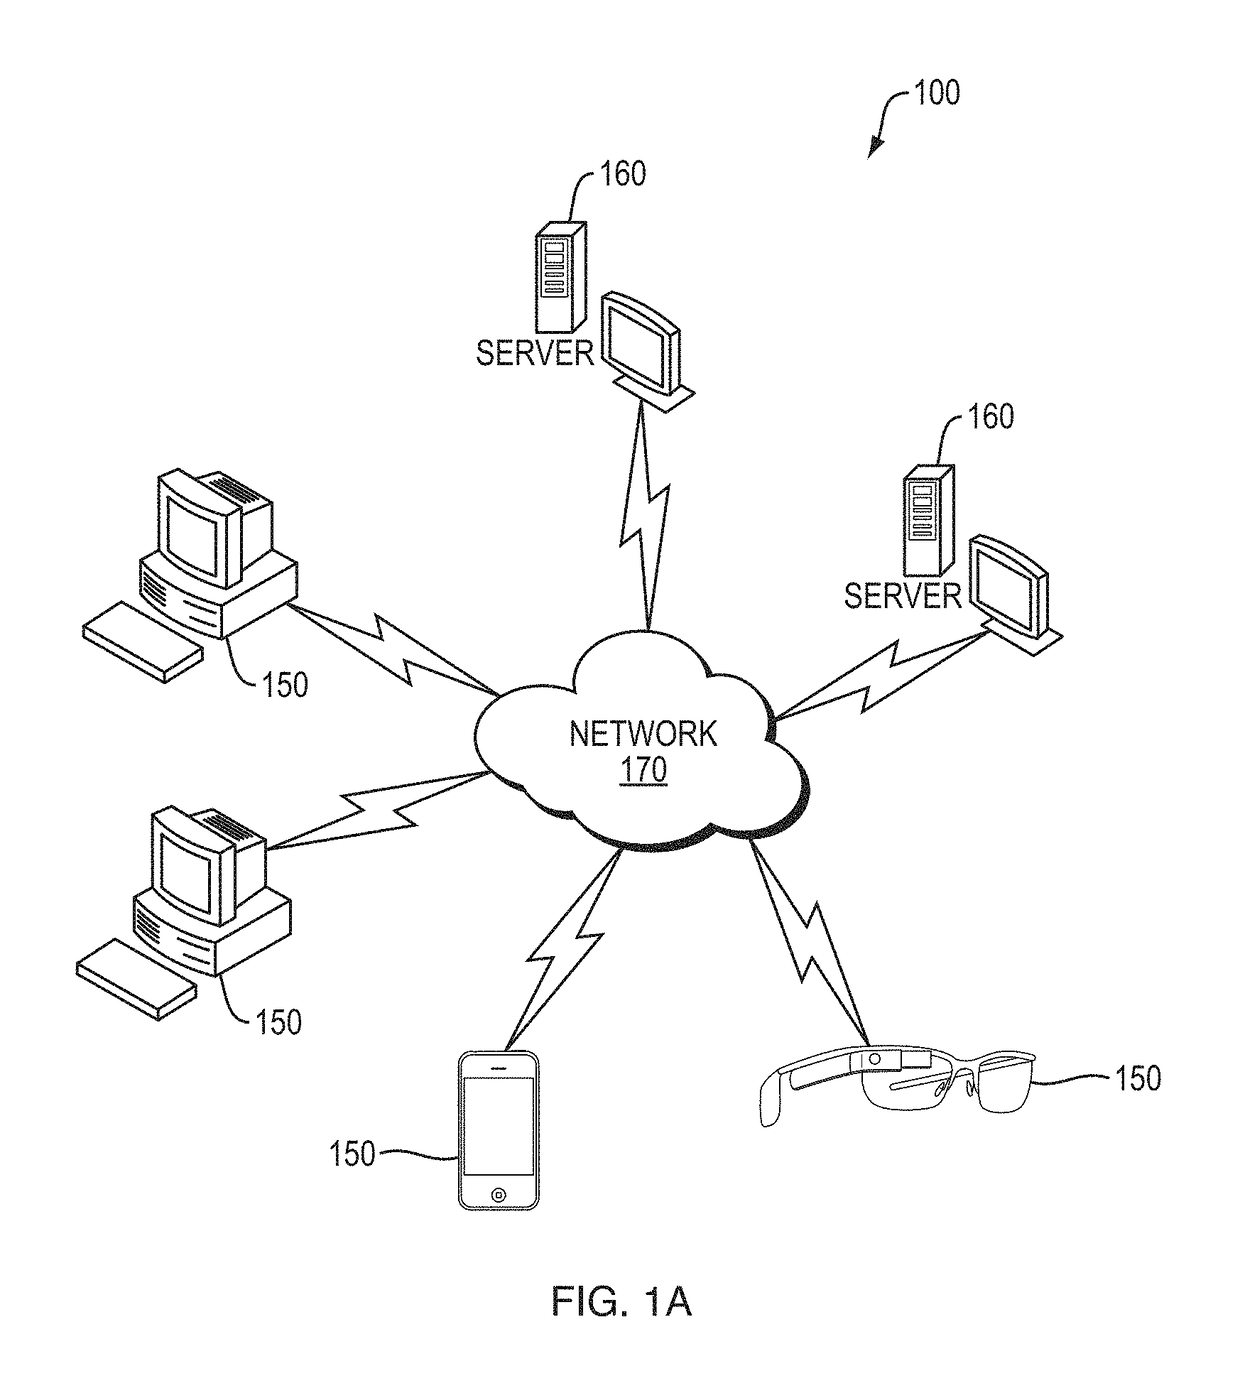 Locking applications and devices using secure out-of-band channels